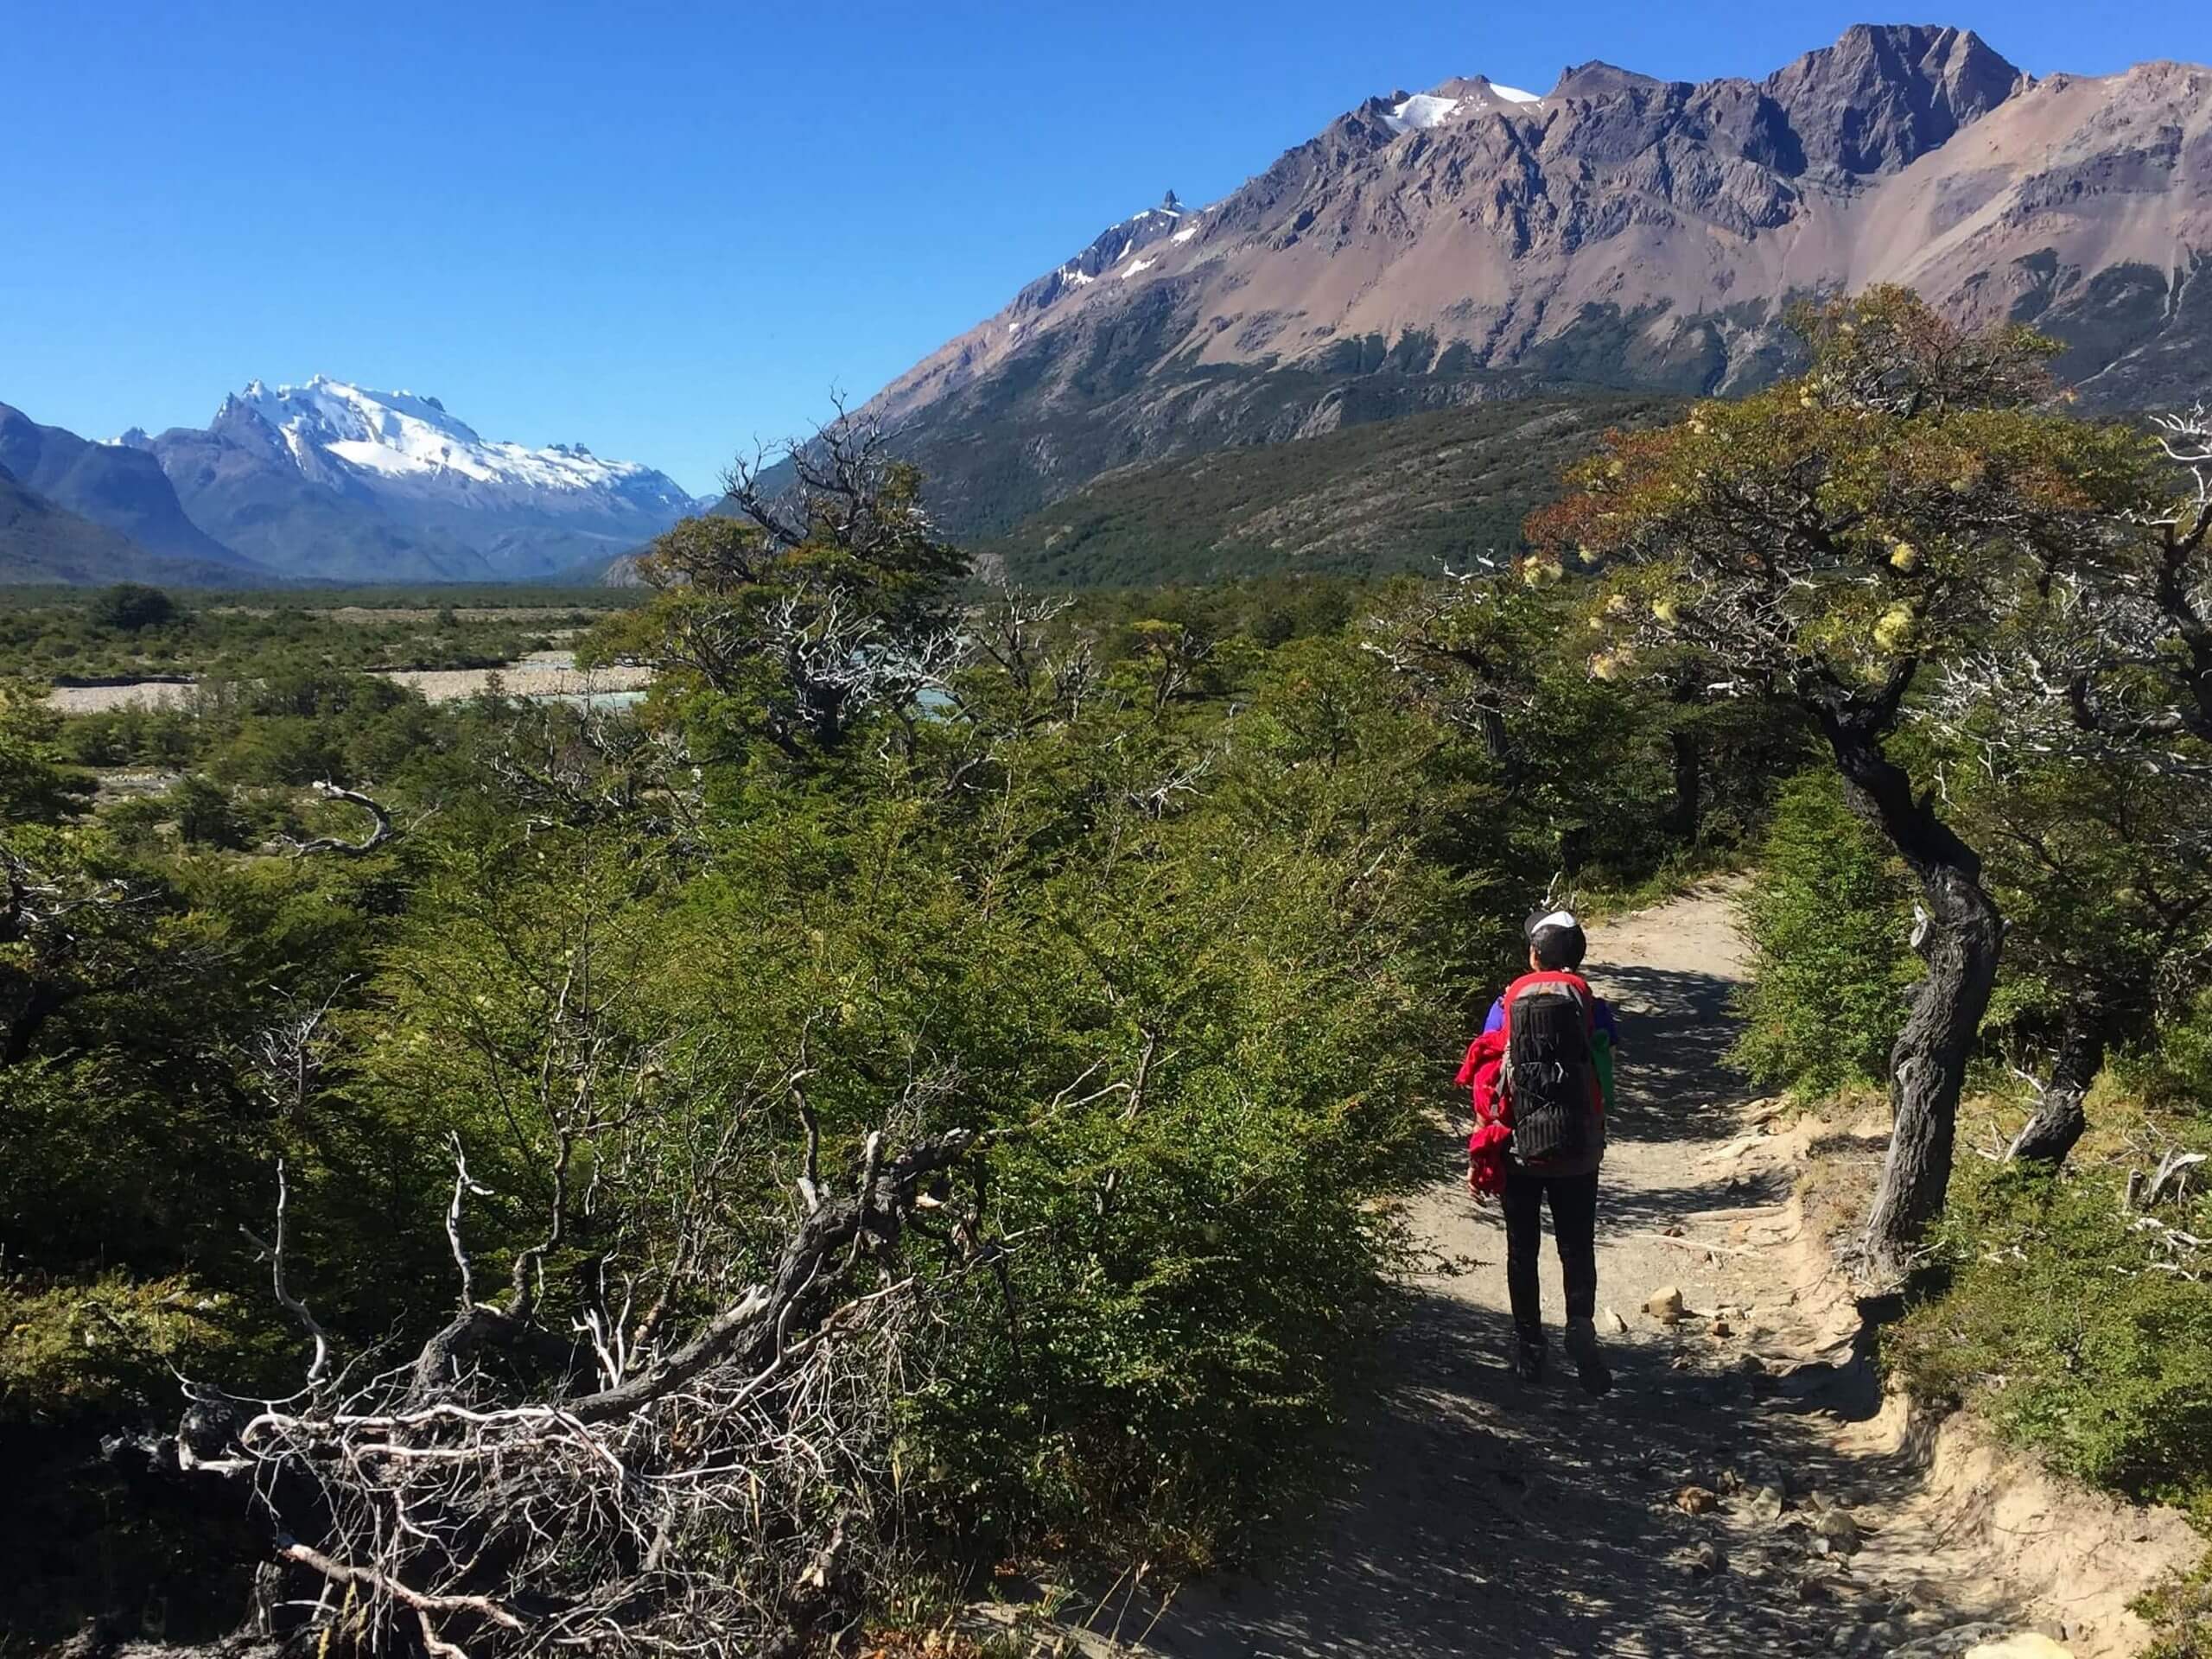 Walking on the rocky path in Patagonia